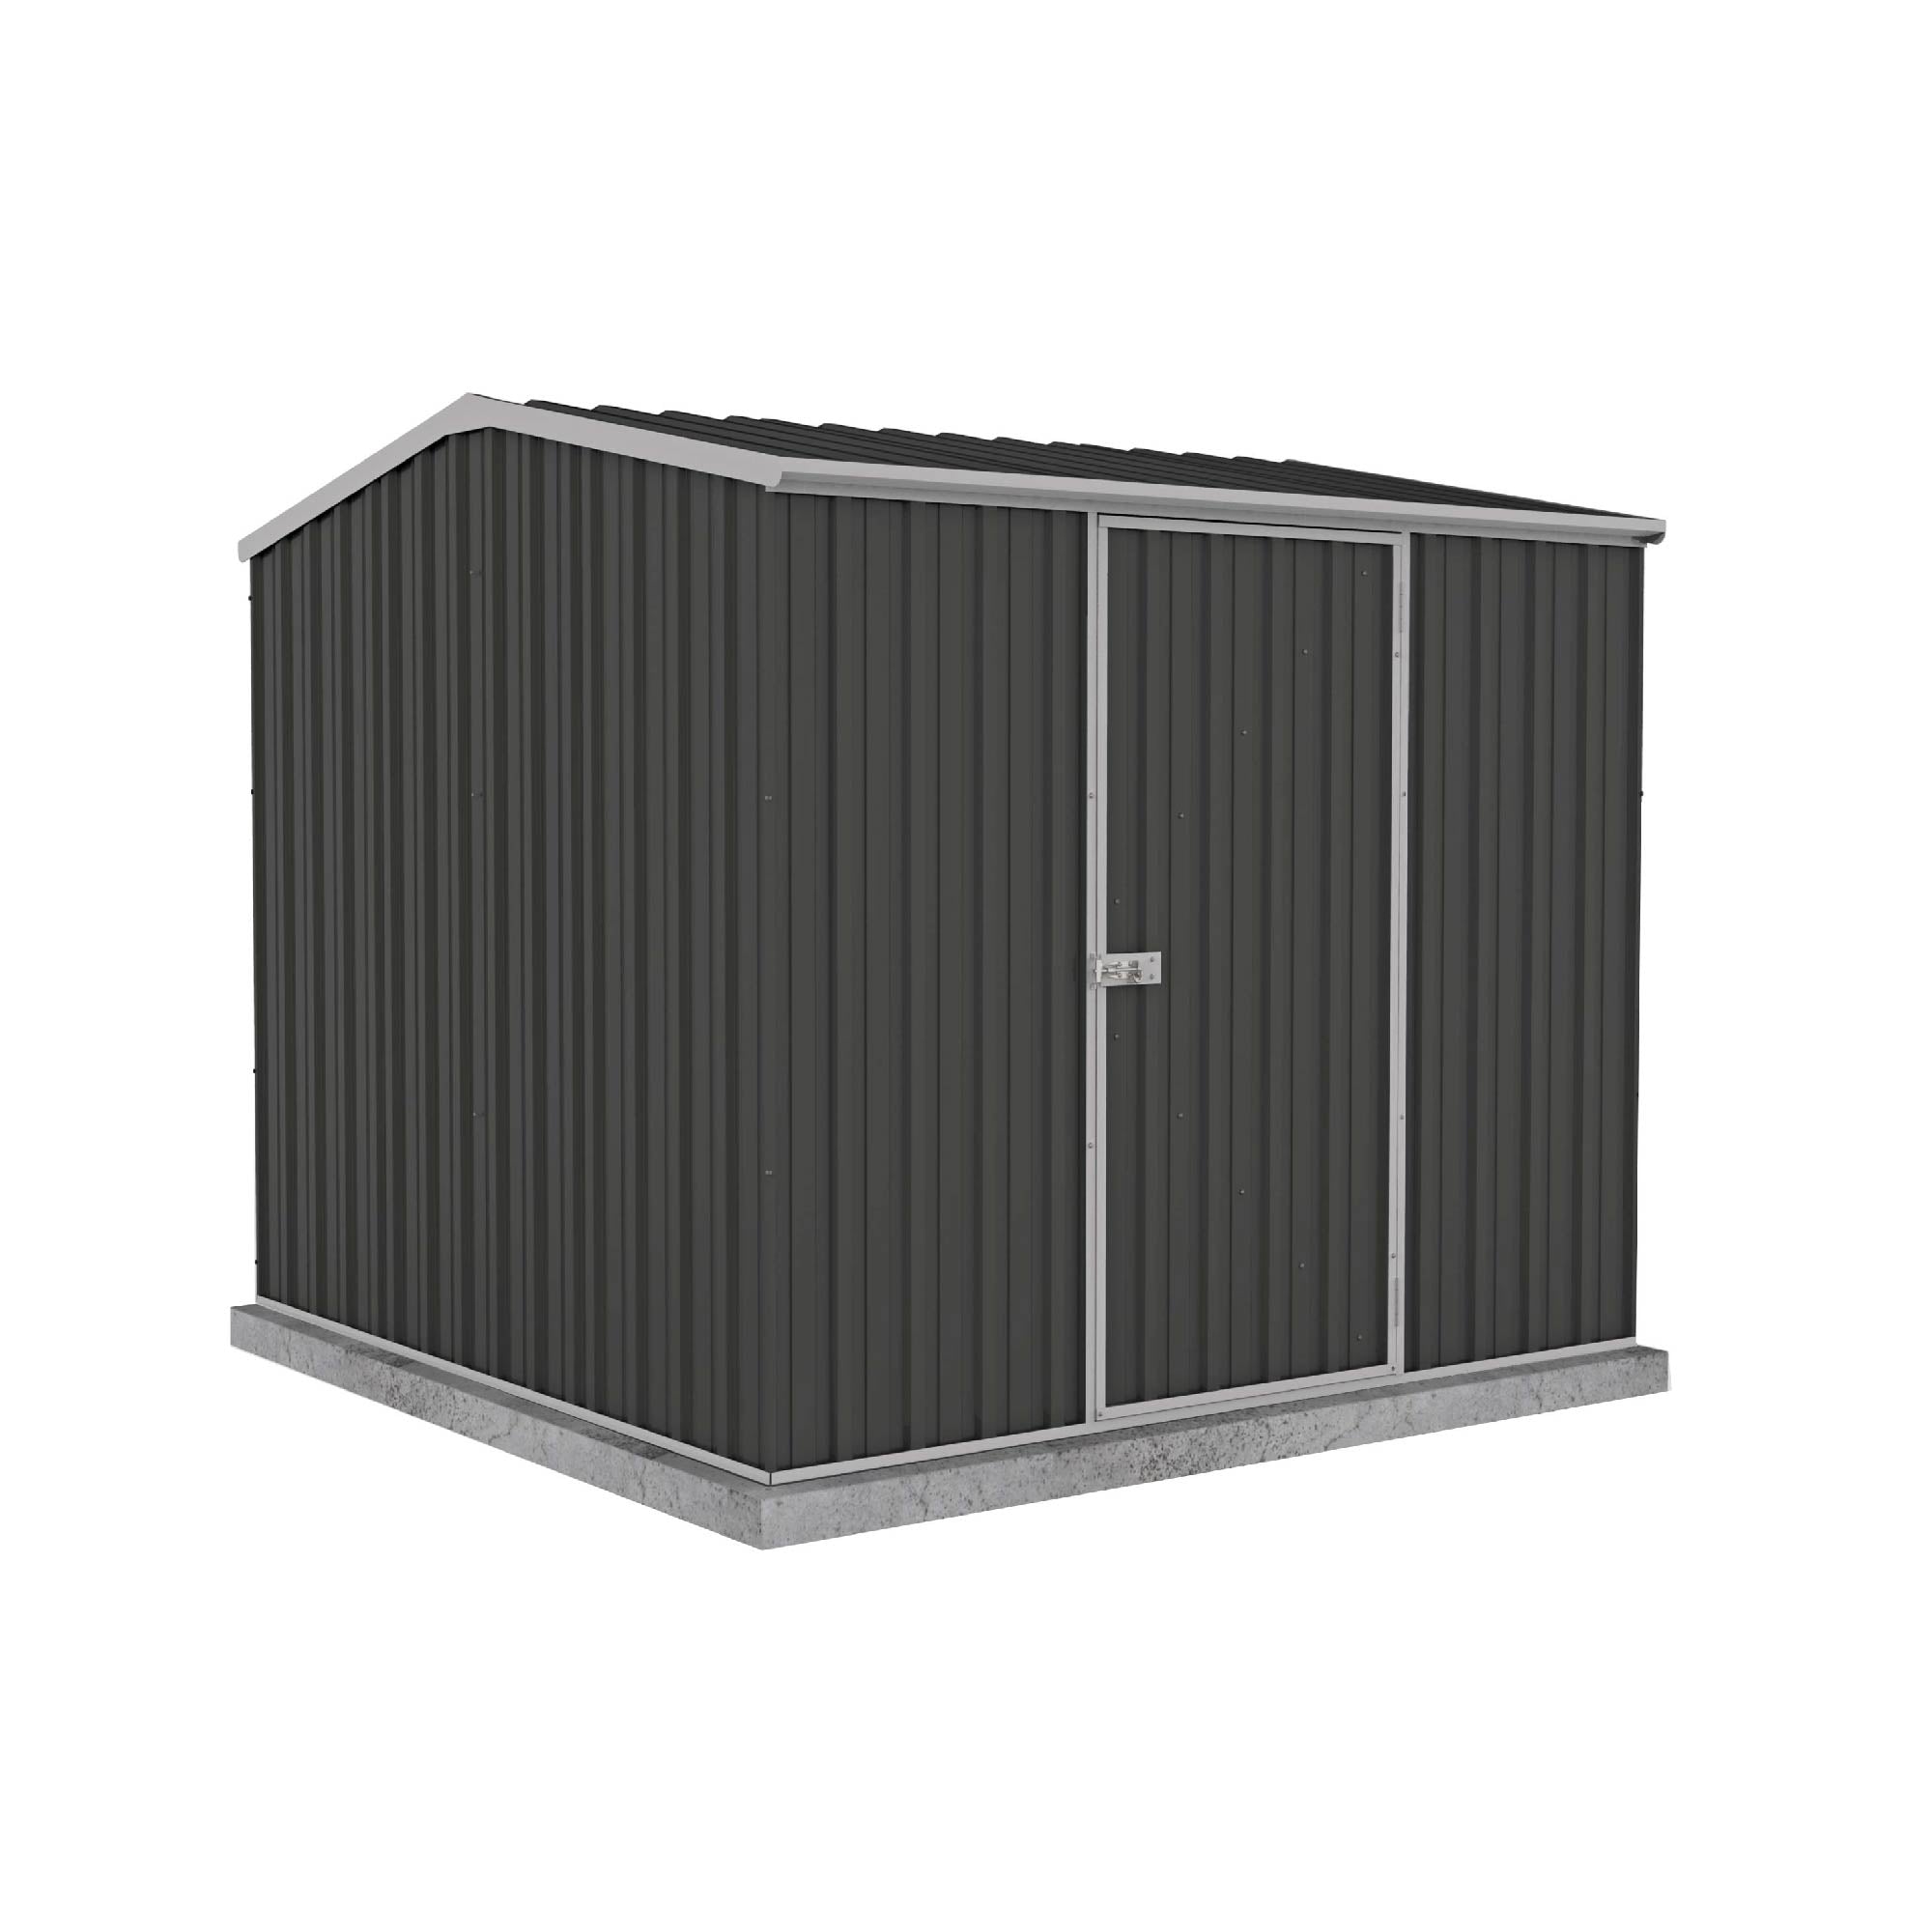 Absco 7' 5 x 7' 5 Monument Premier Metal Shed